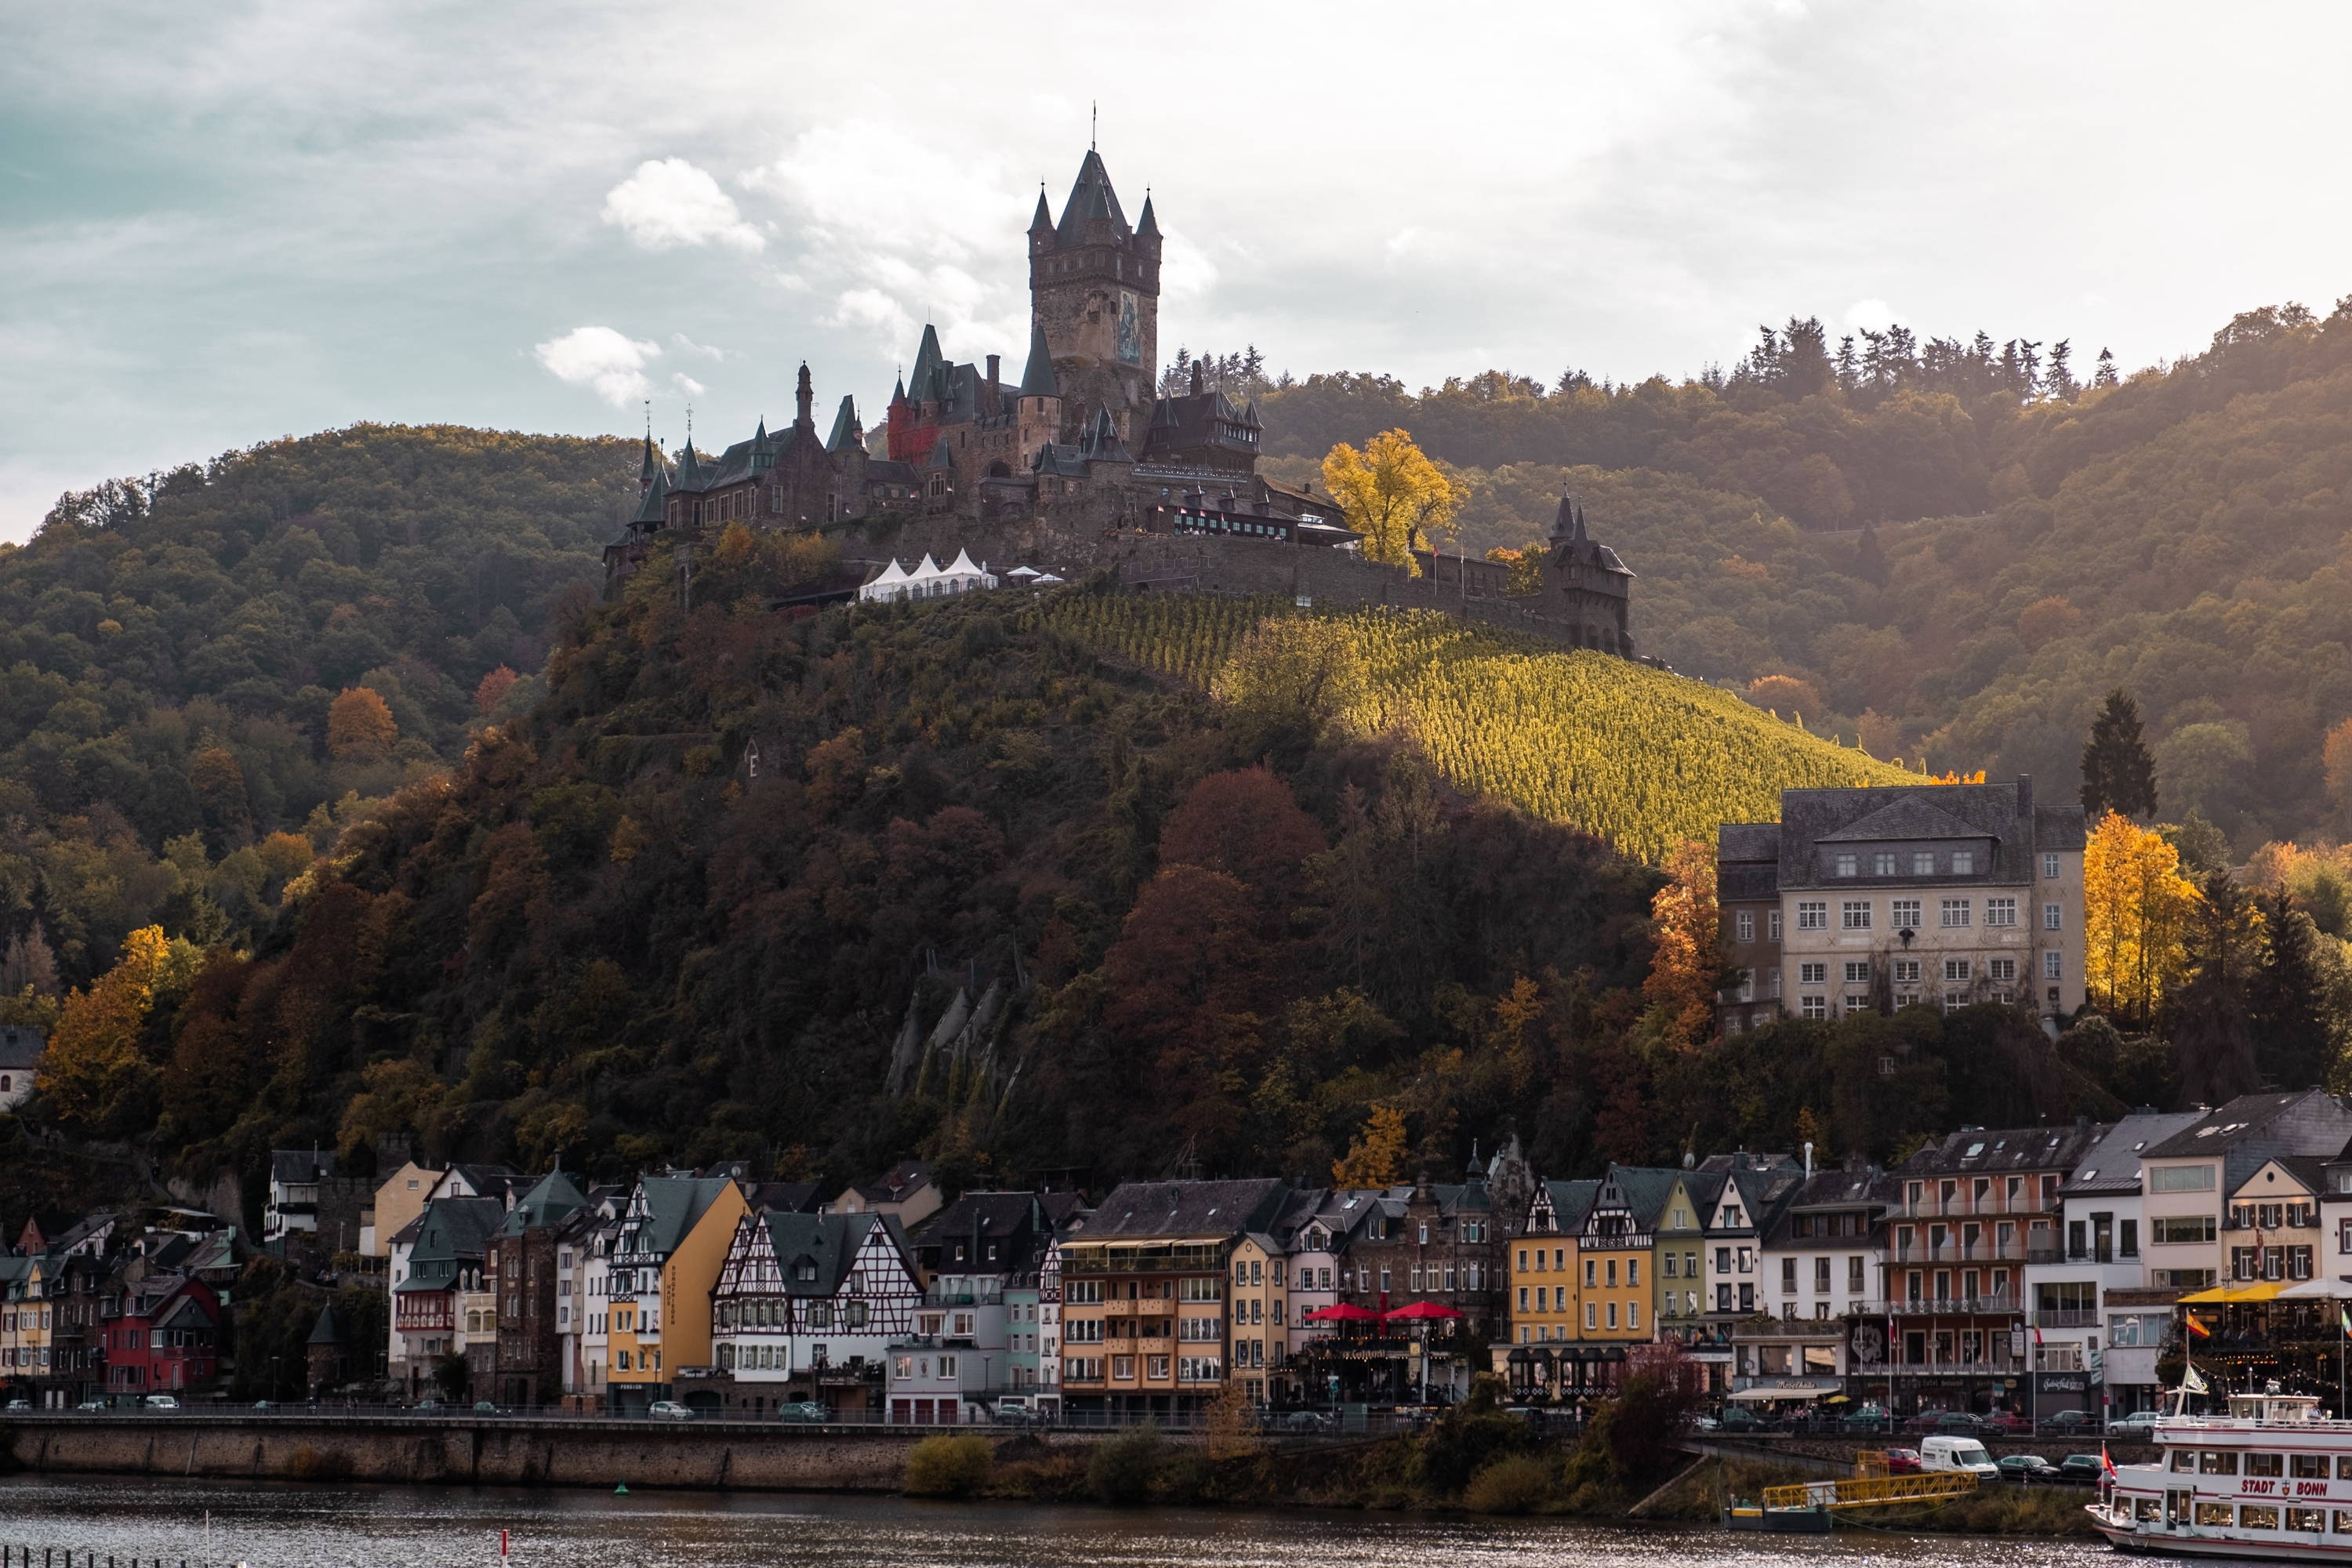 German wine town along the river, with castle and vineyard on the hill. 